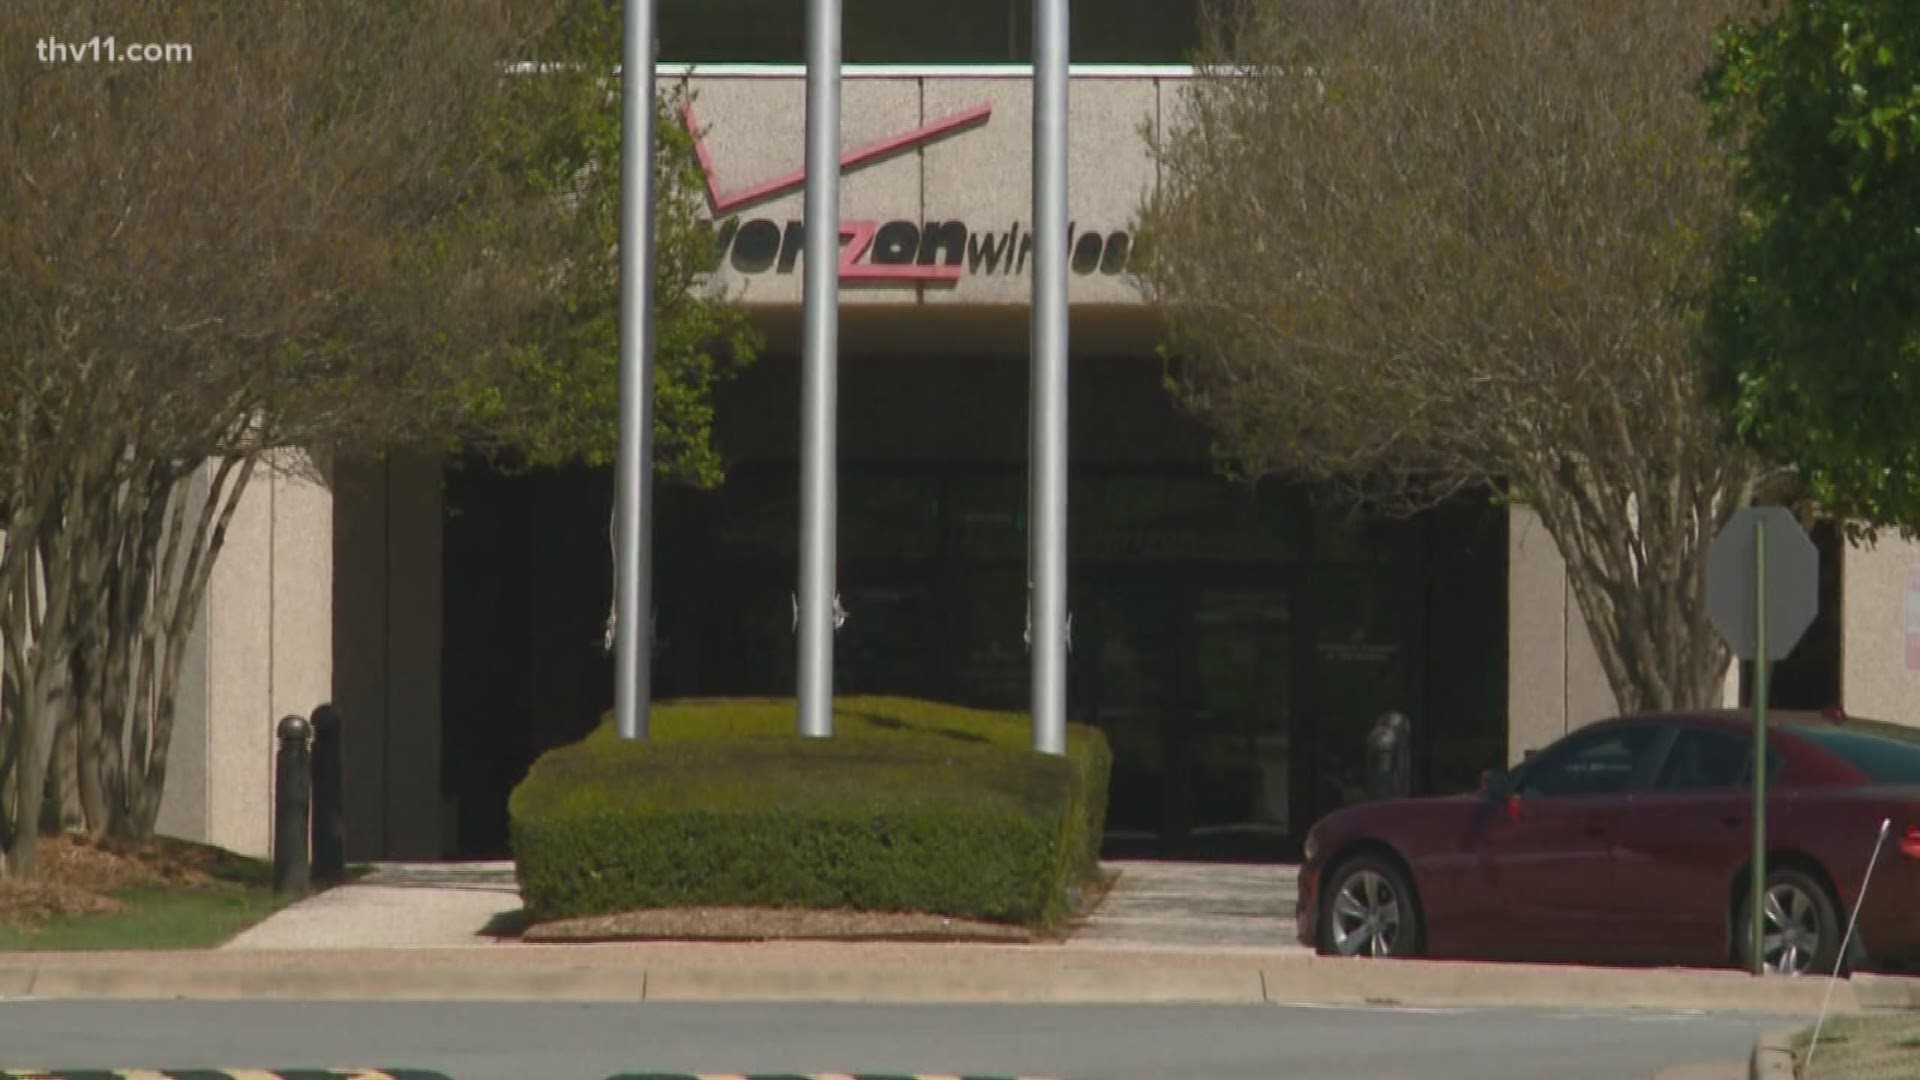 A state agency confirms to THV11 that it bought Little Rock's Verizon Building No. 4.